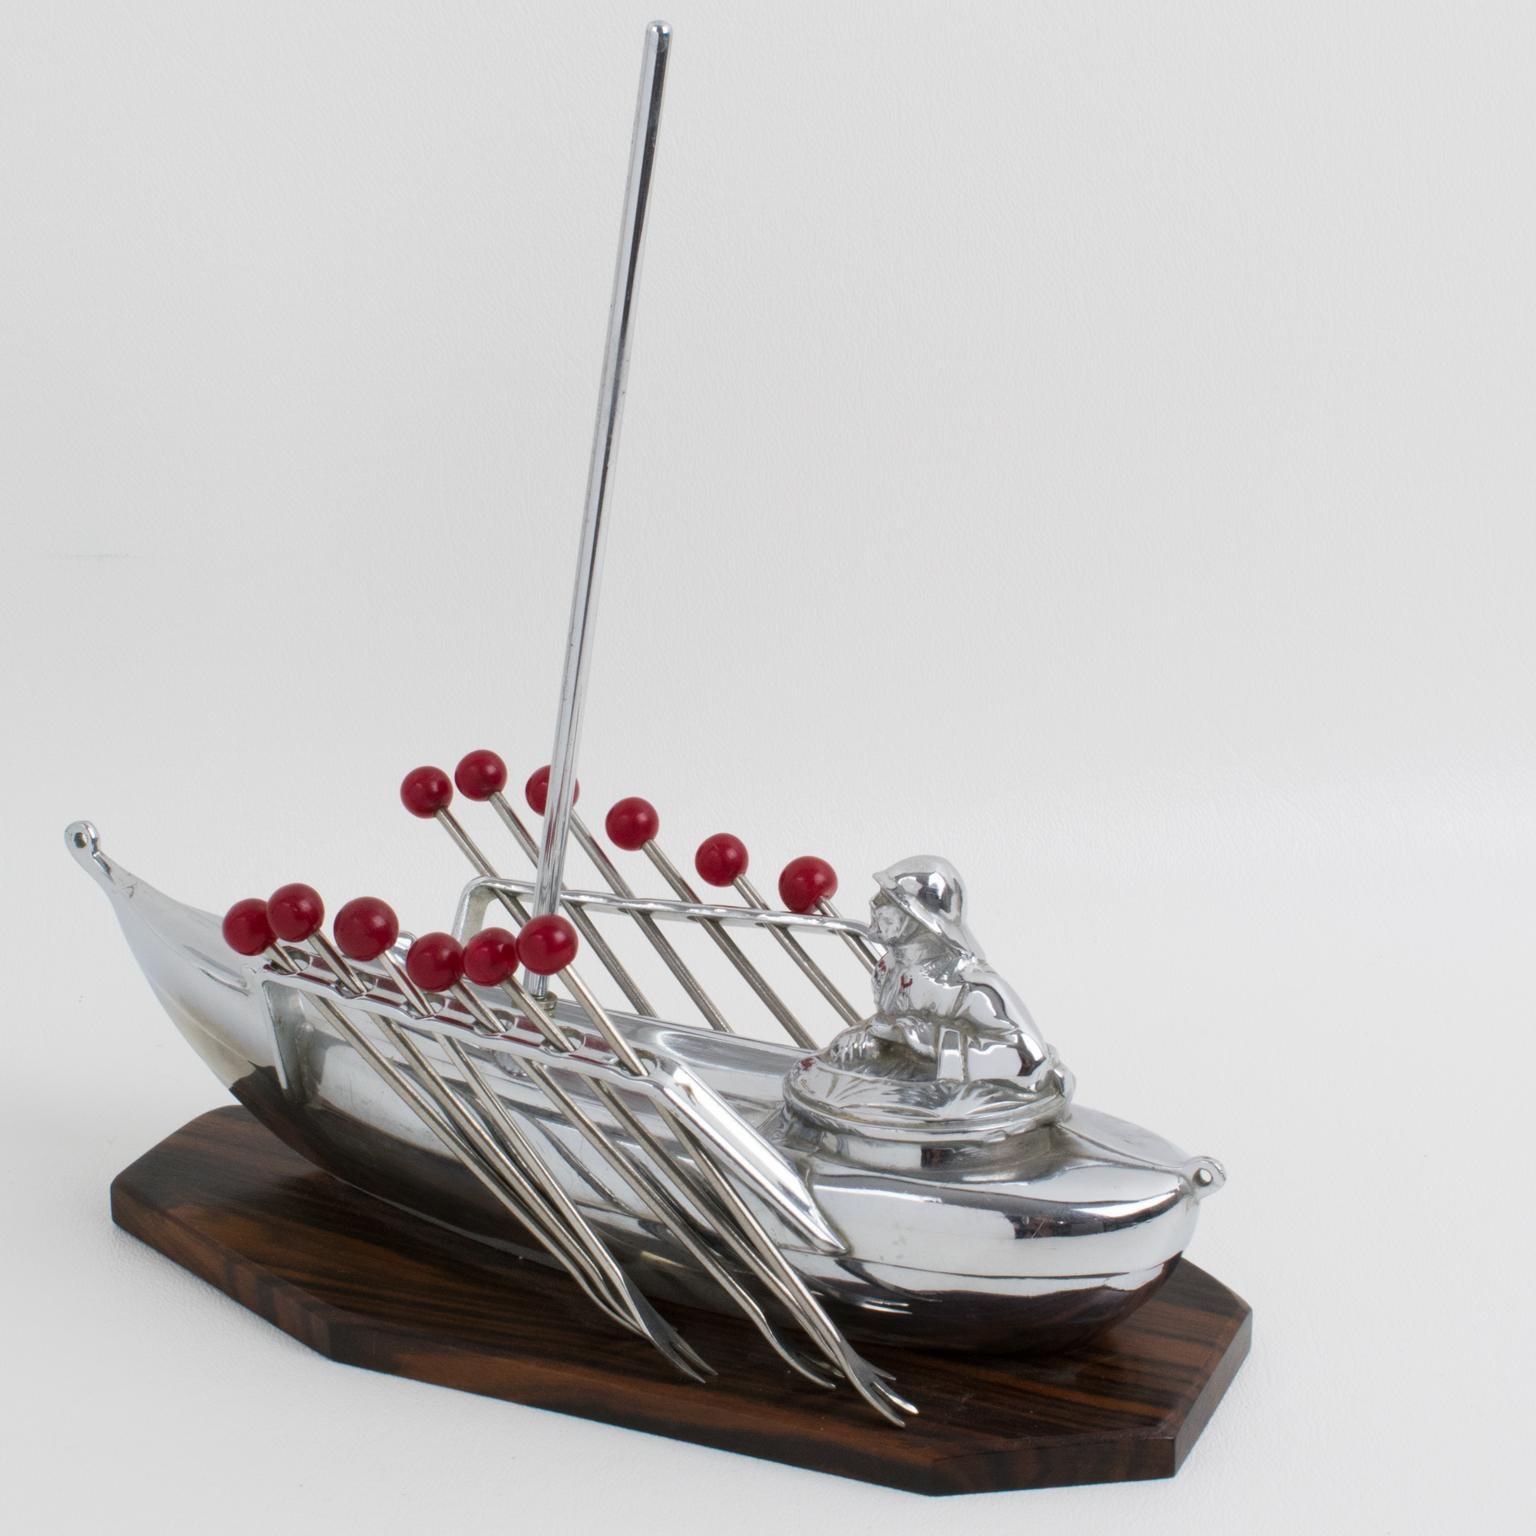 This stunning French set of cocktail picks features a miniature boat with a sailorman. Twelve forks with red Bakelite finial can be removed from each side of the sailboat and be used for cocktail picks for Manhattans, Martinis, or any other cocktail